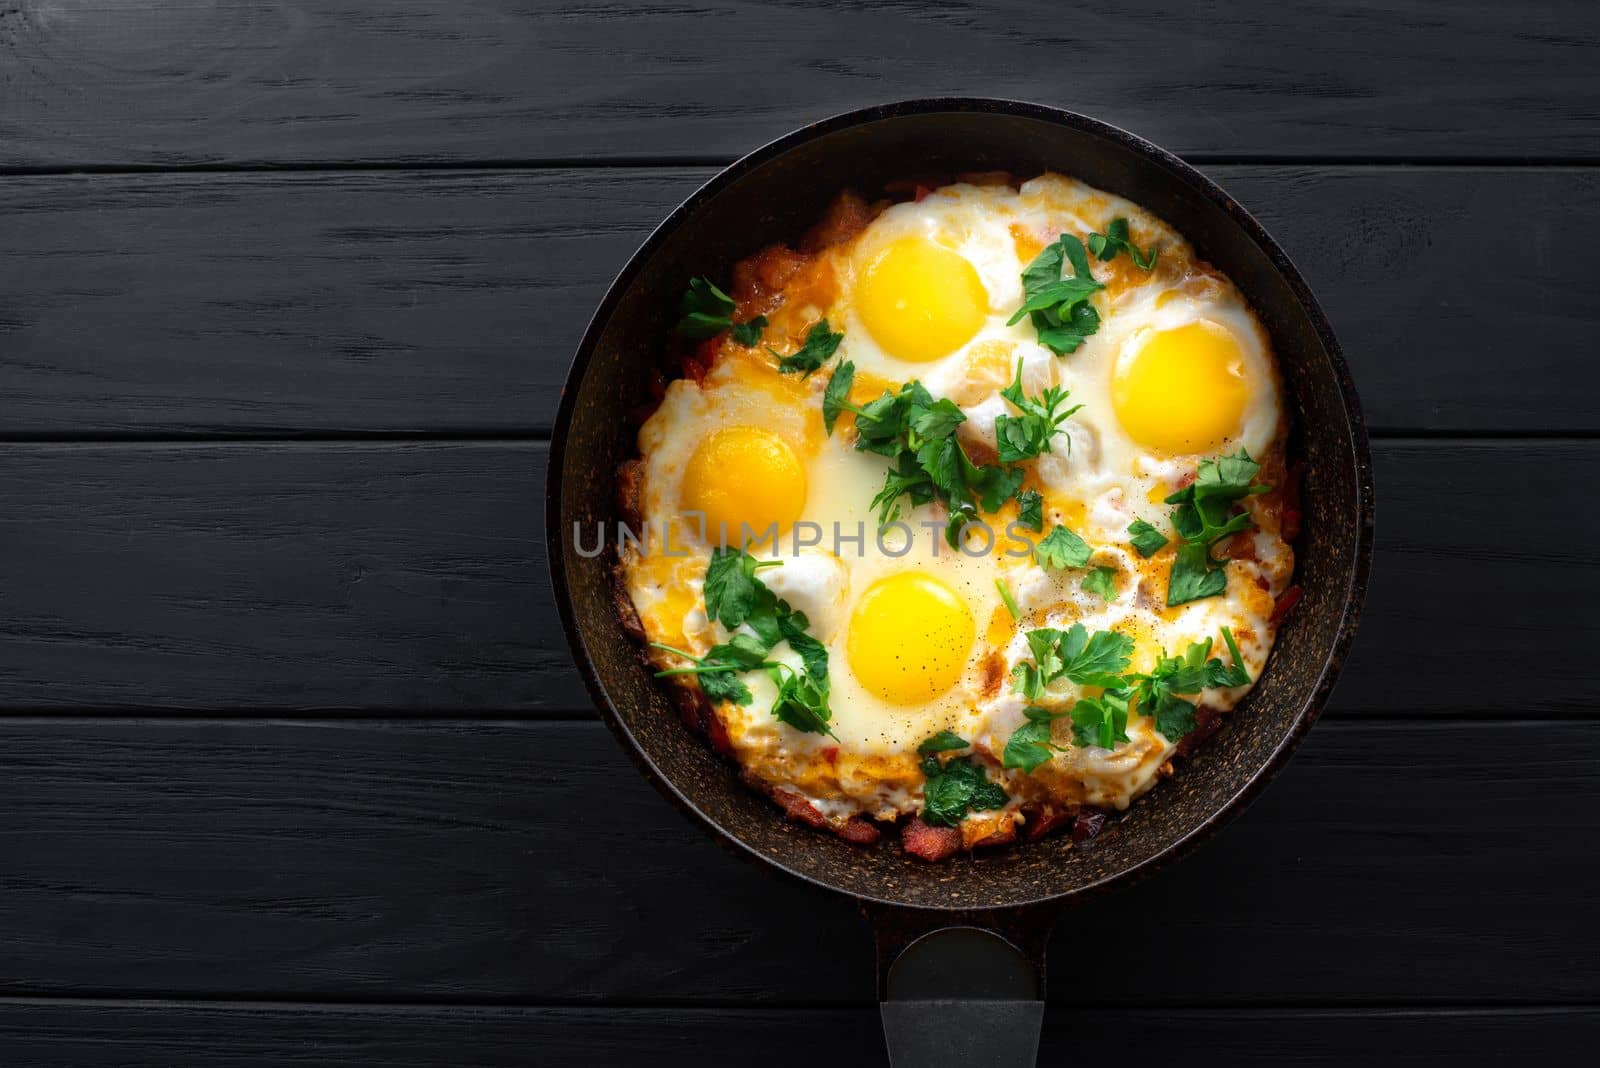 Homemade rustic fried eggs with tomatoes and parsley greens in a pan by gulyaevstudio